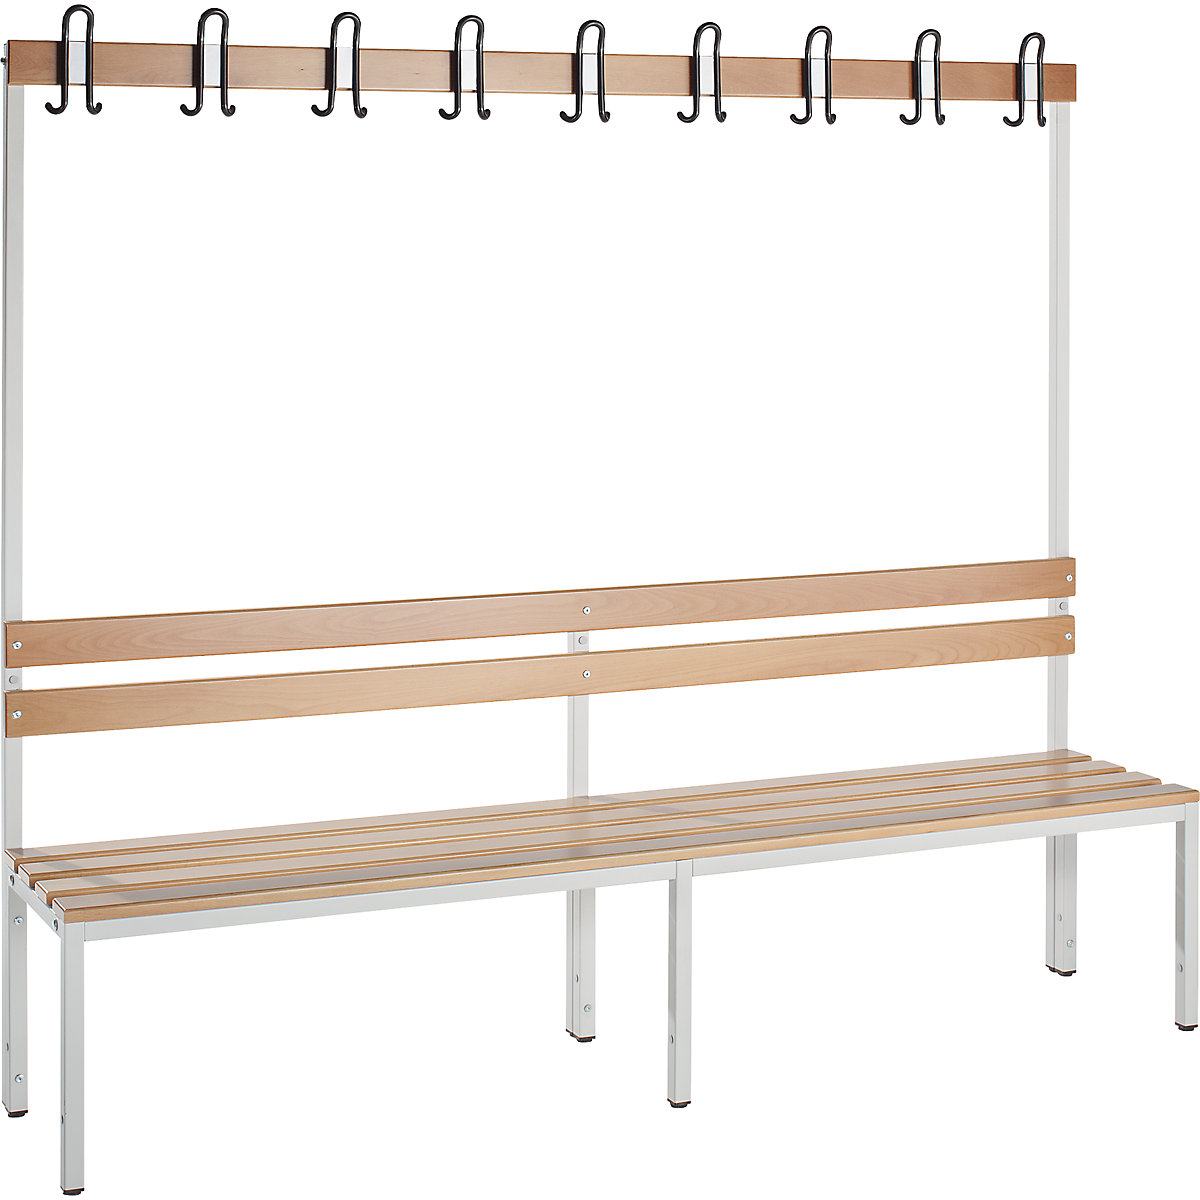 Beech cloakroom bench – eurokraft basic, single sided with back rest, HxD 1700 x 430 mm, length 2000 mm-5